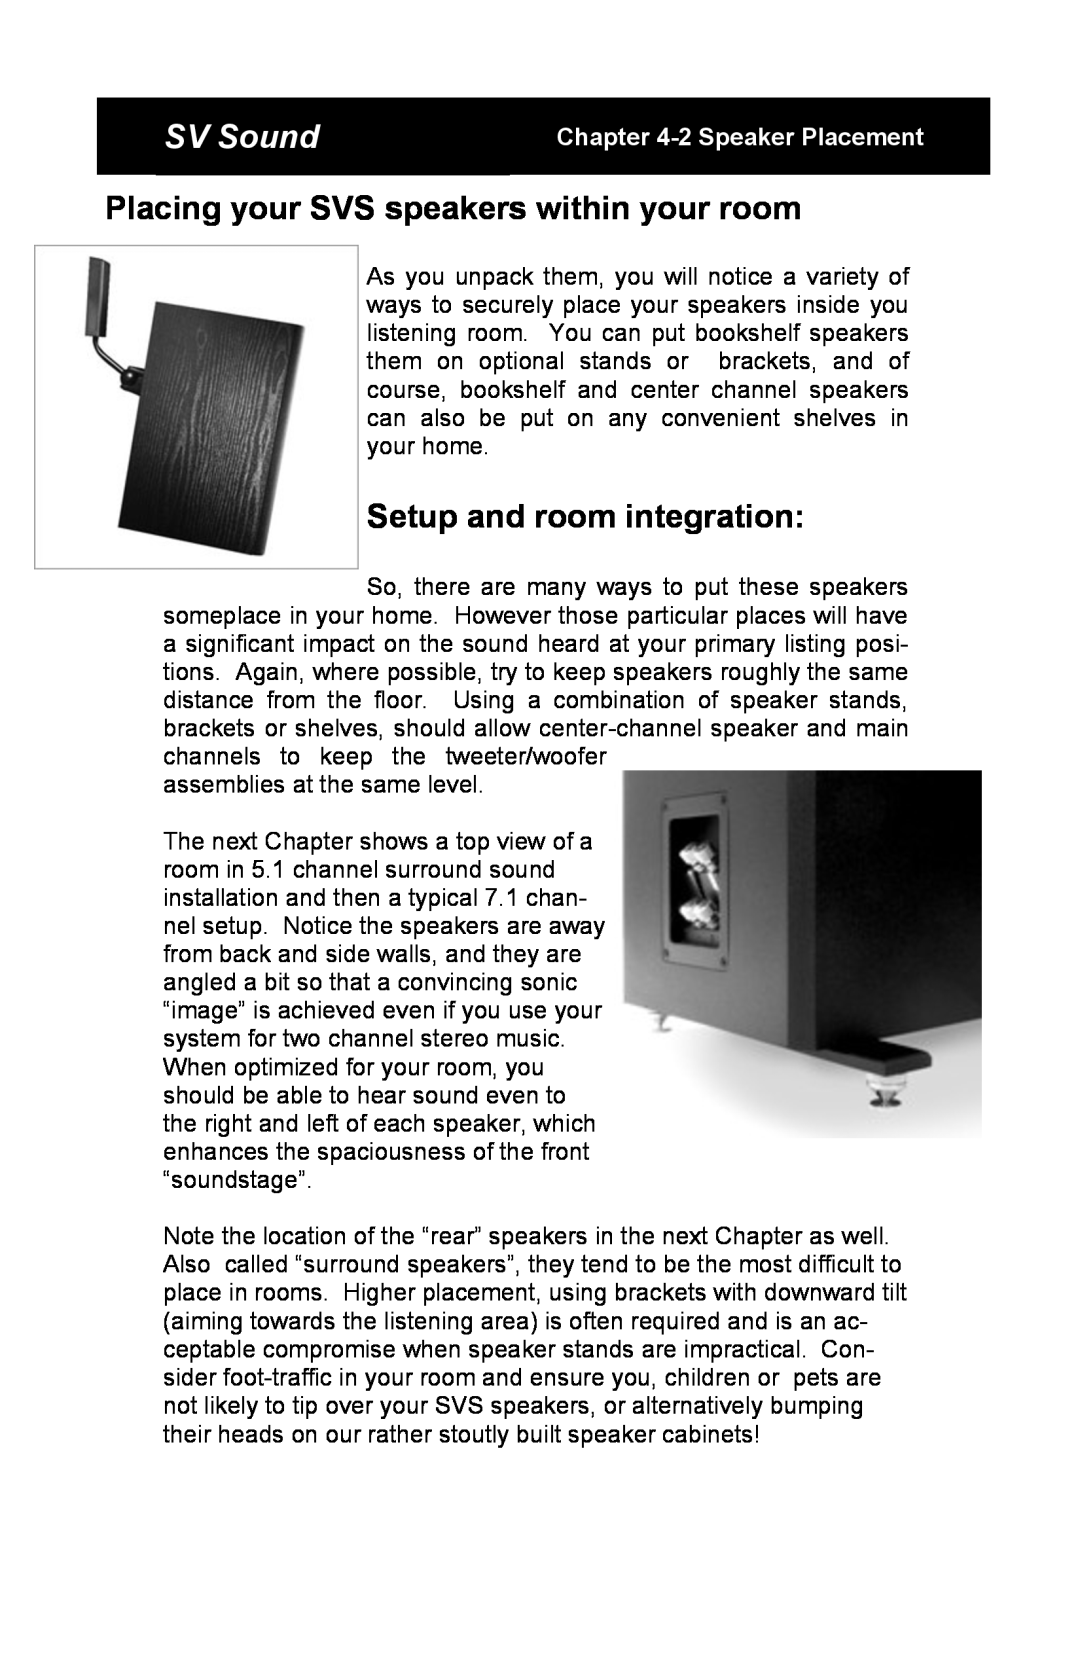 SV Sound SCS-01 Placing your SVS speakers within your room, Setup and room integration, SV Sound, 2Speaker Placement 